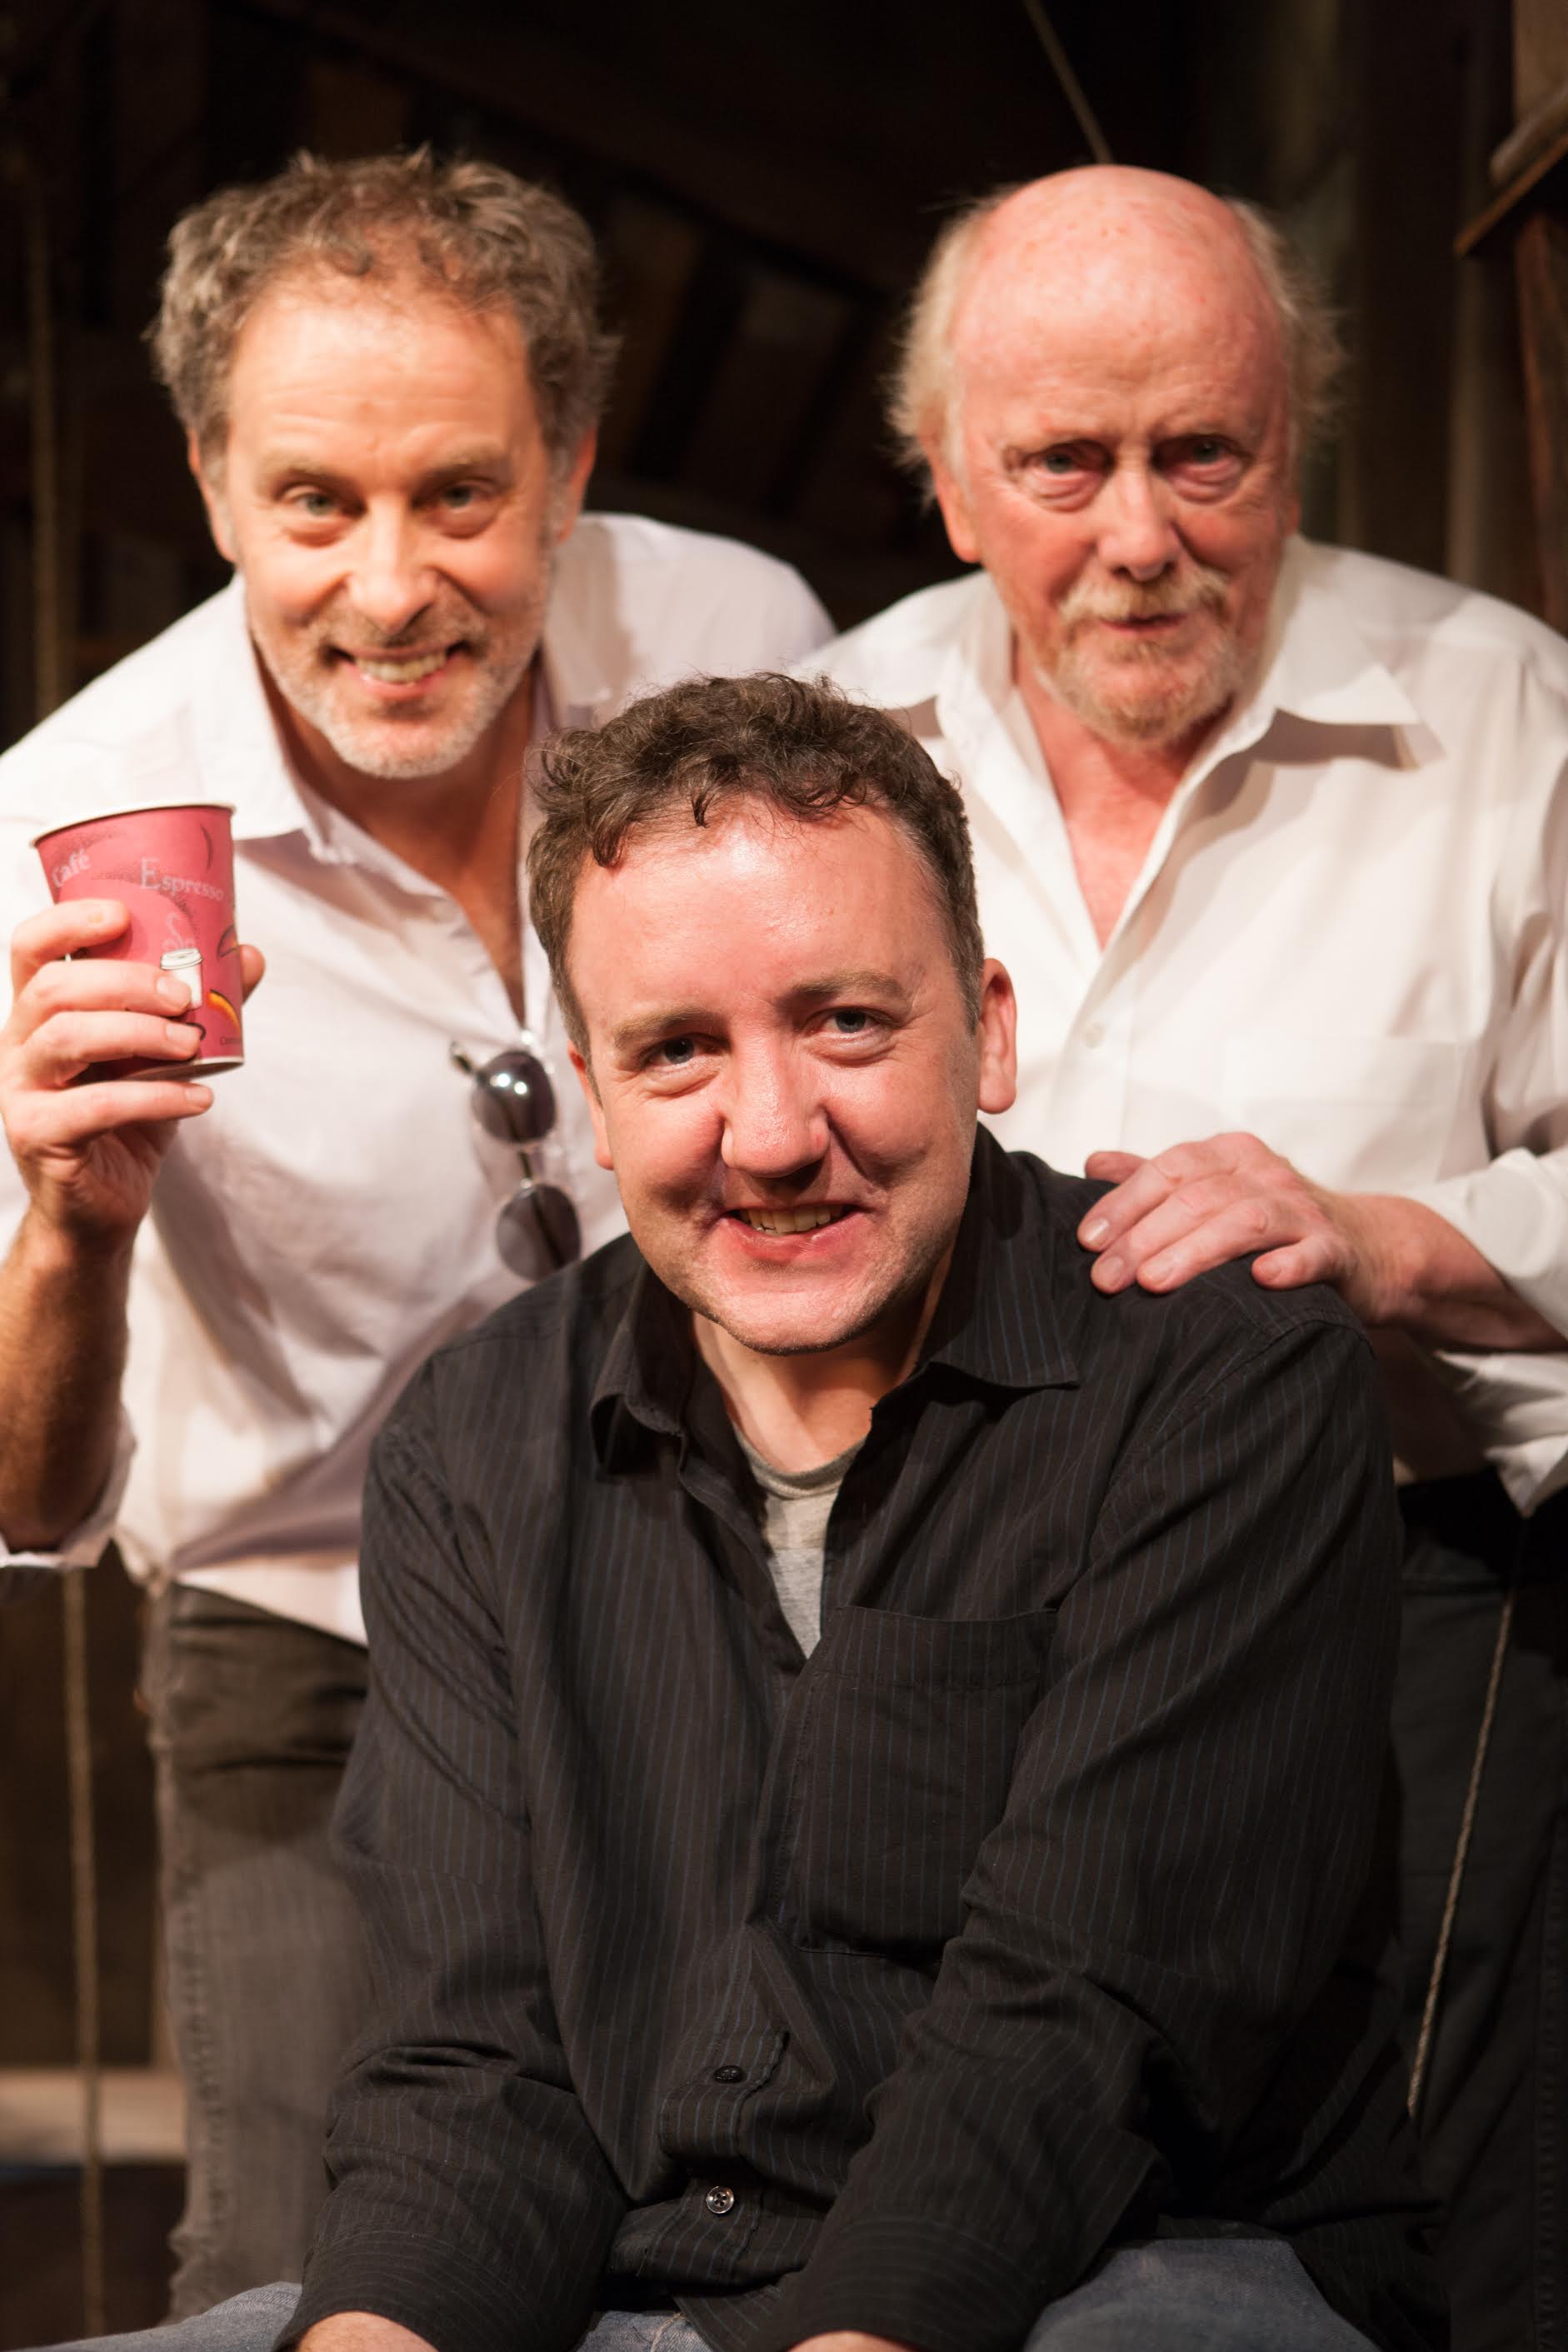 John McManus, front, with the cast of the ‘The Quare Land’, Rufus Collins, left, and Peter Maloney